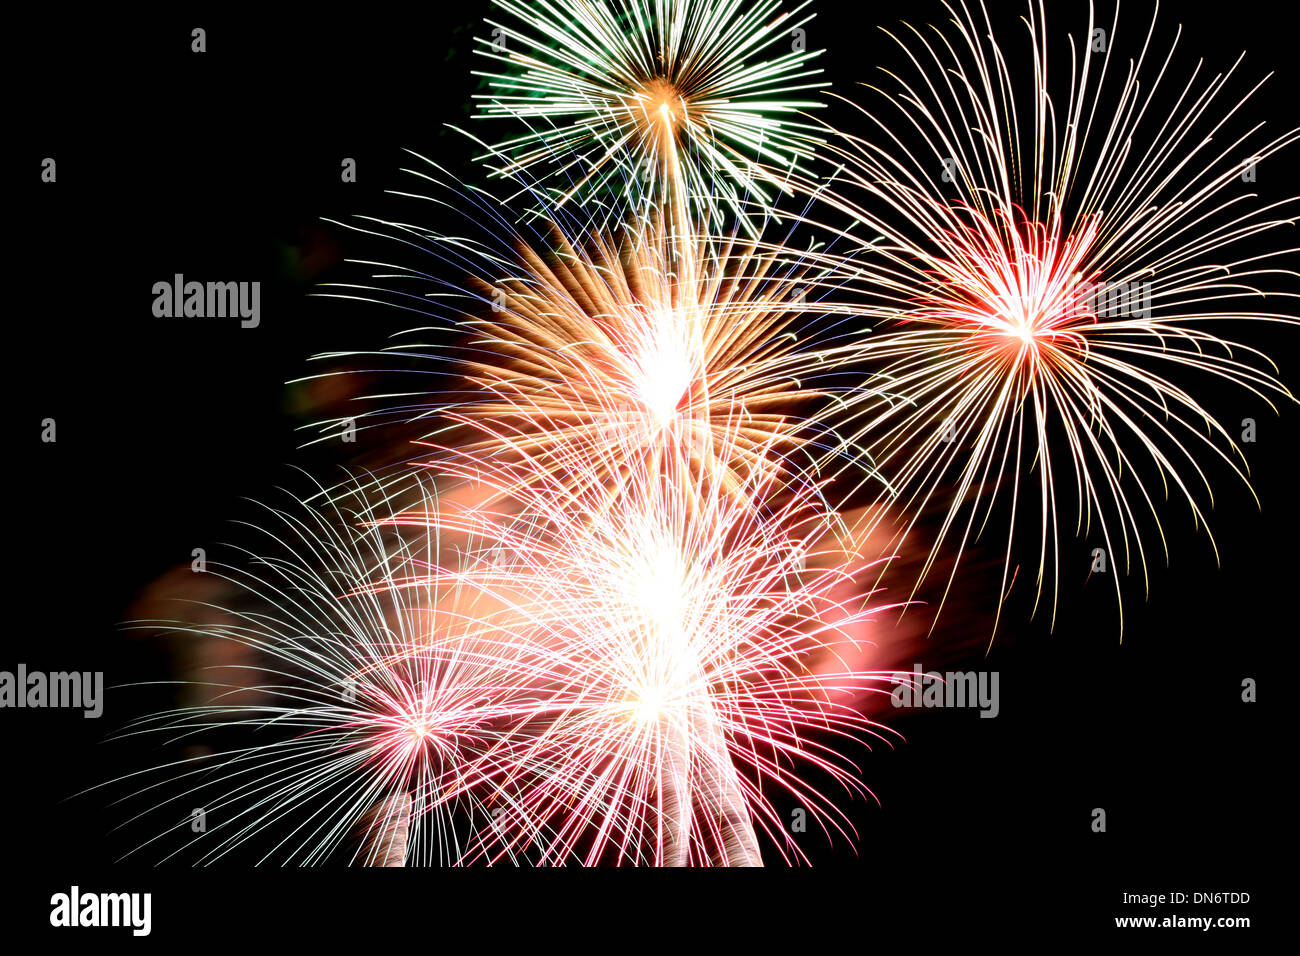 Variety of Colorful Fireworks or firecracker in the darkness. Stock Photo